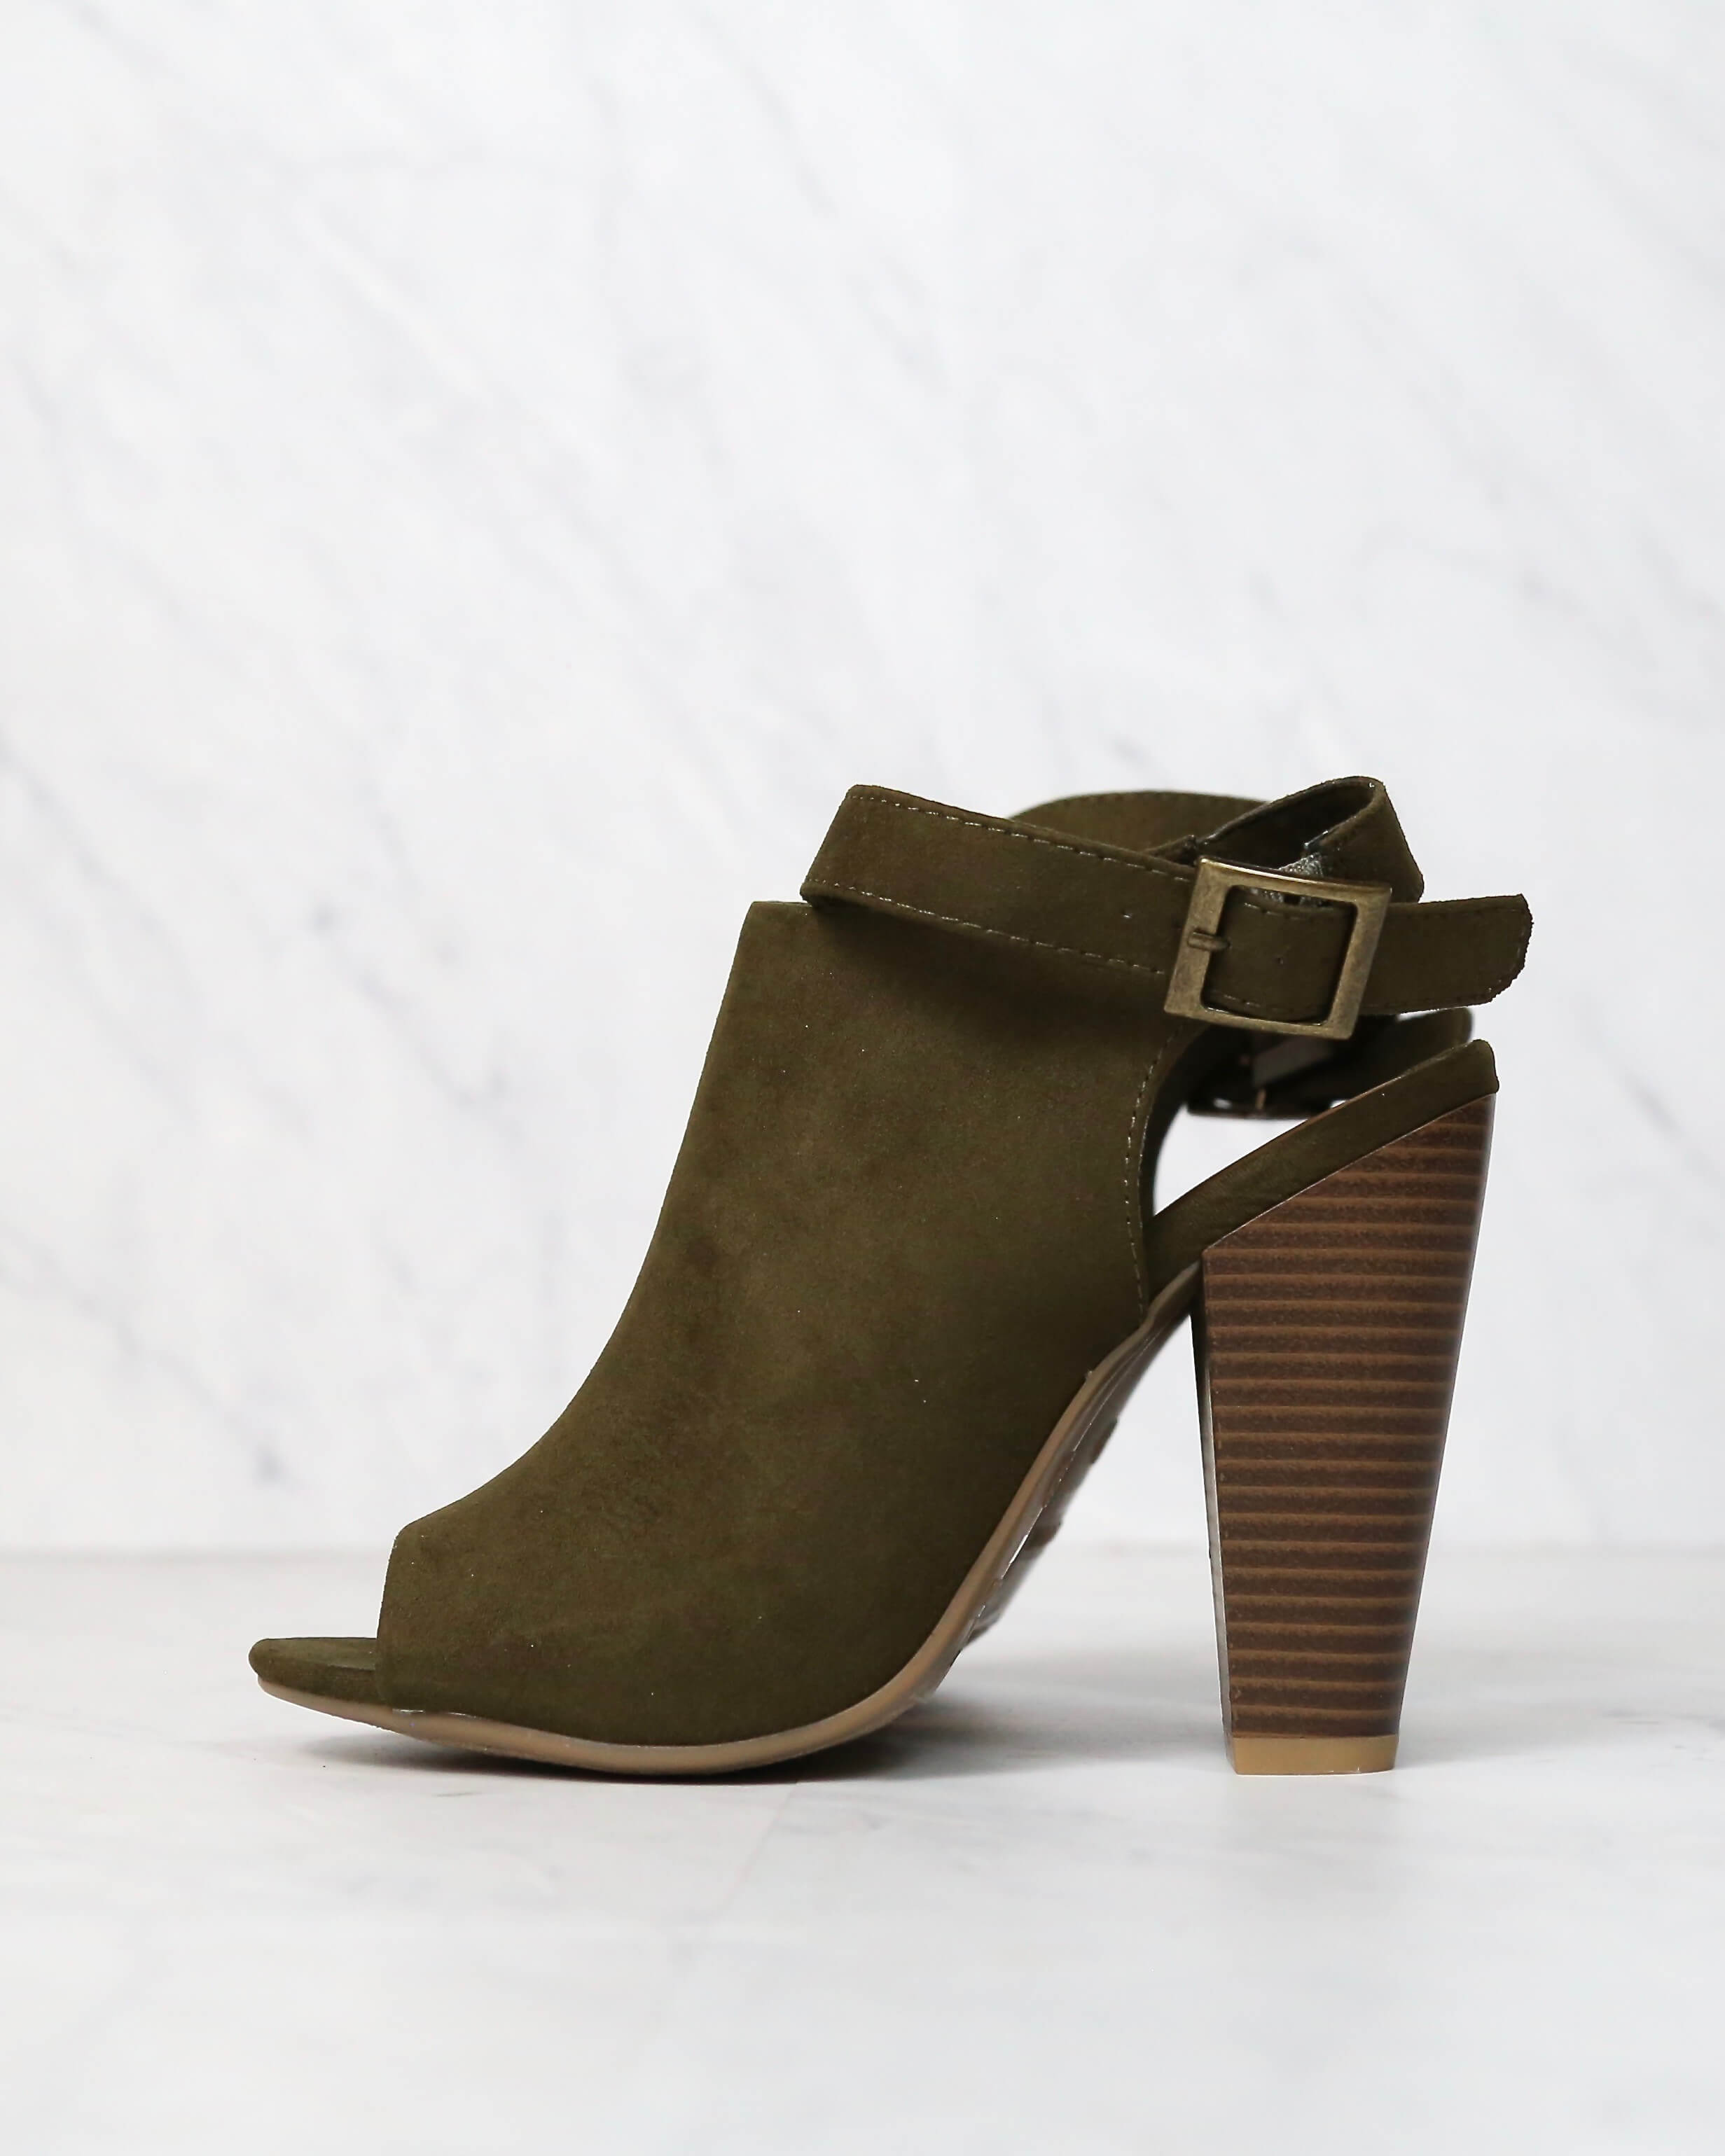 Vegan Suede Wrap Around Ankle Peep Toe Booties in More Colors – Shop Hearts